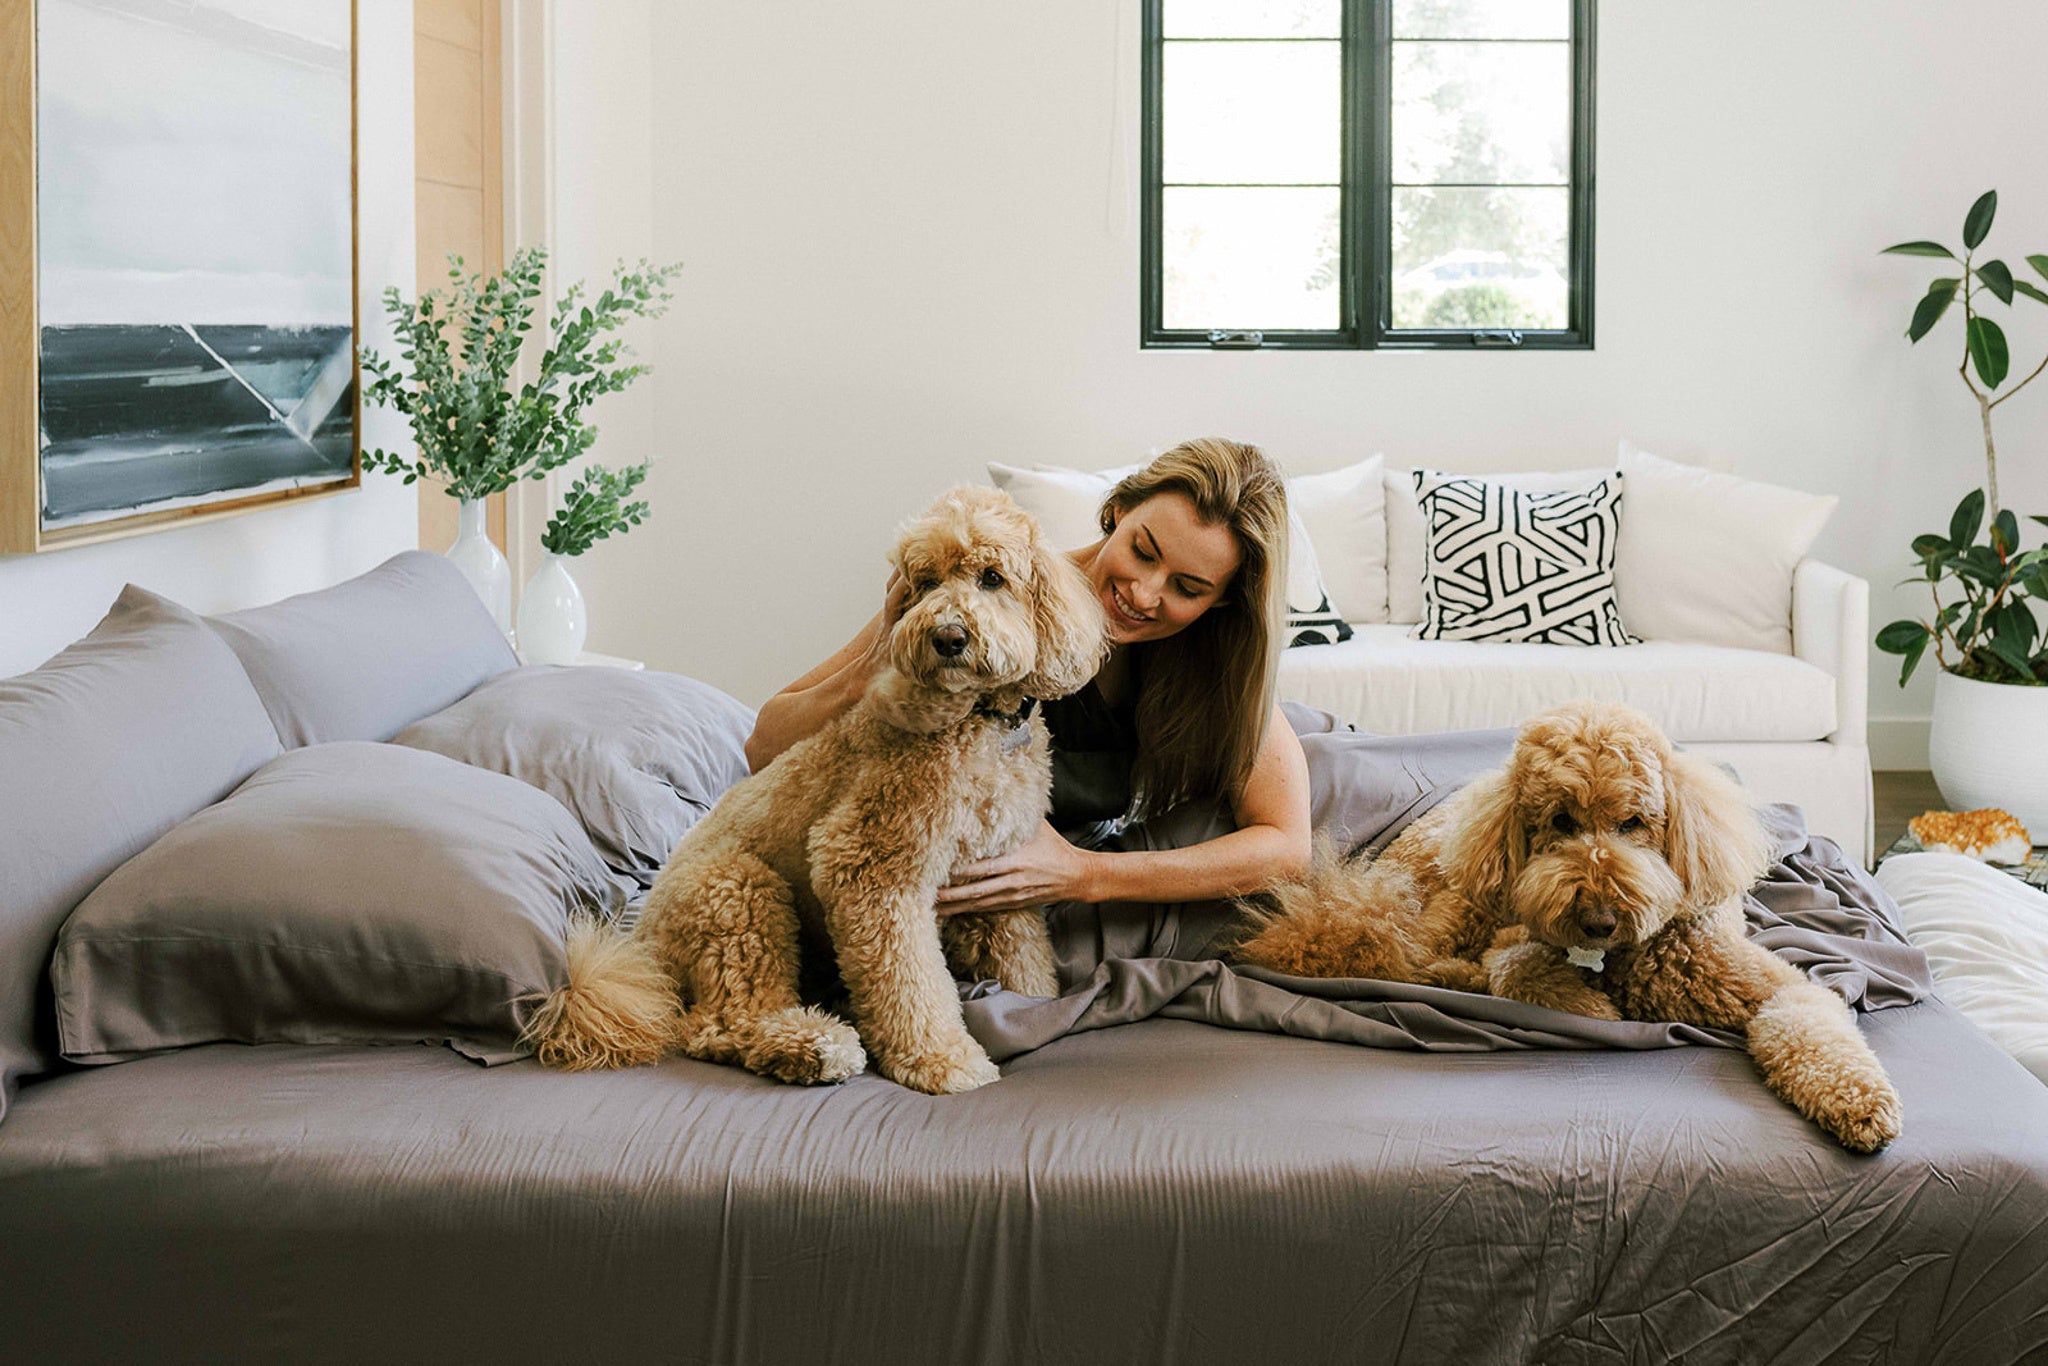 Create an organized and designated space for your pets